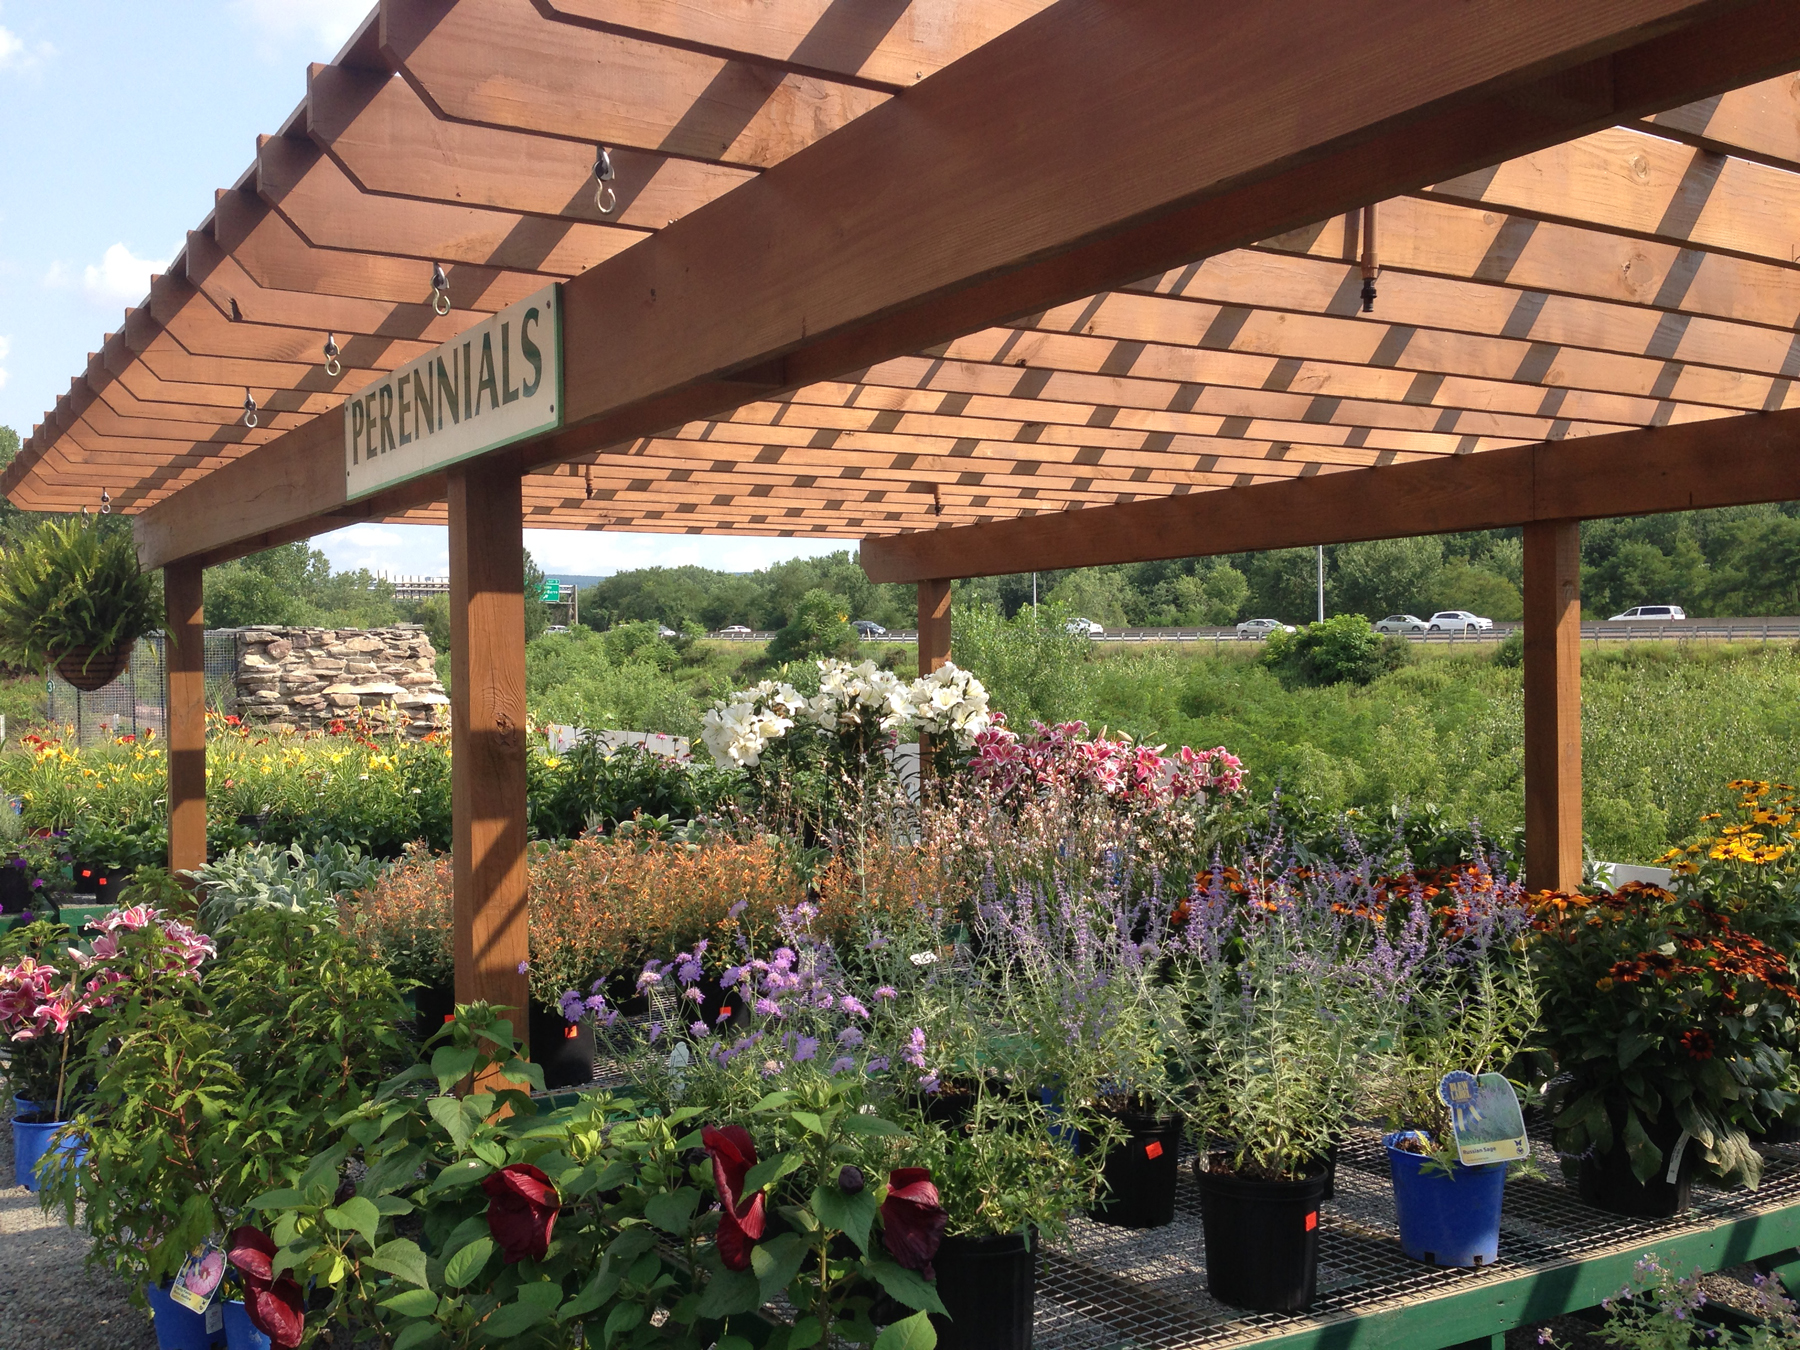 Edward's Garden Center in Forty Fort offers hundreds plants and flowers